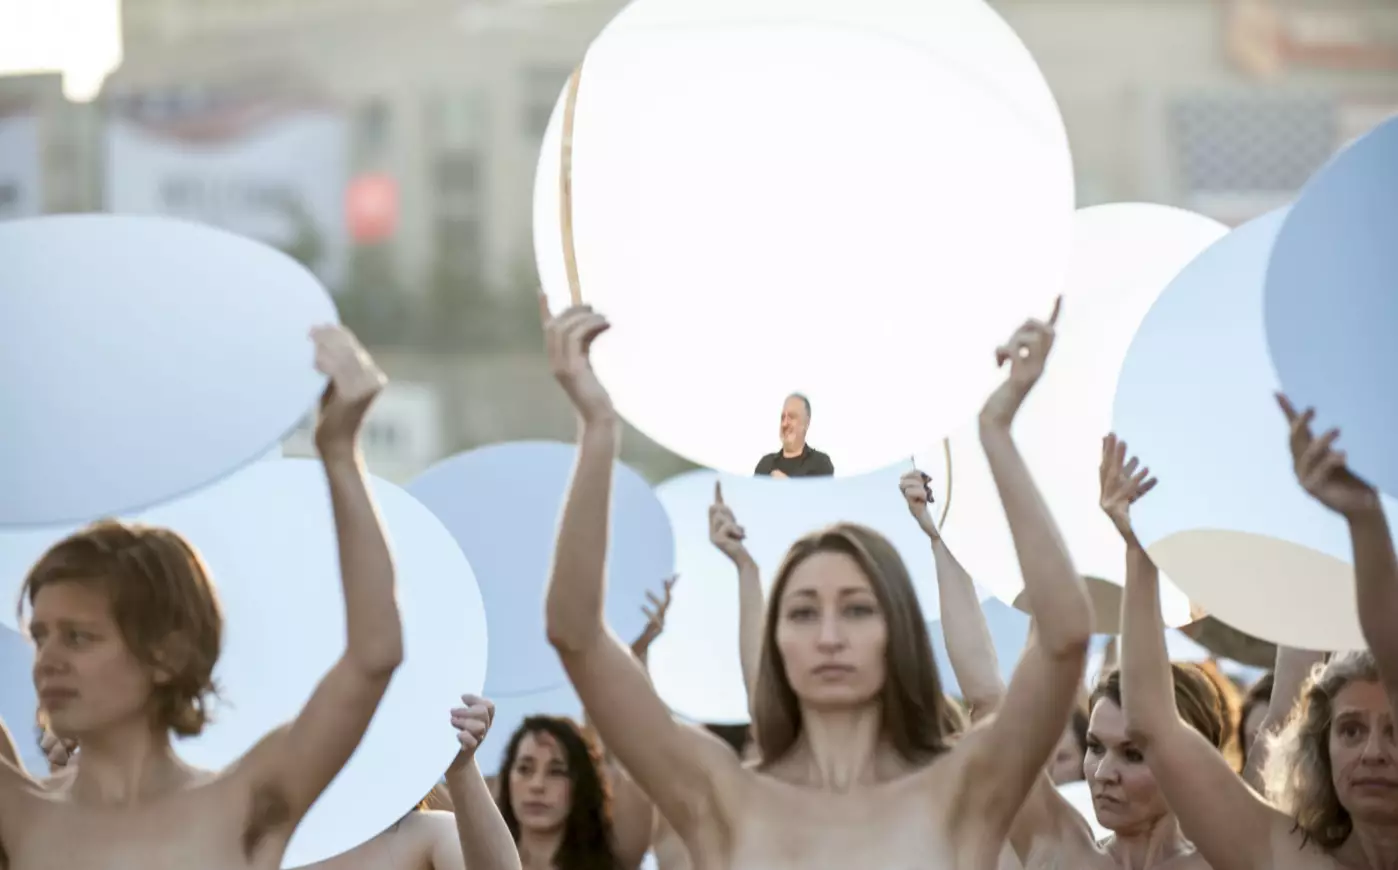 100 Naked Women Gather To Protest Against Donald Trump At Republican Convention